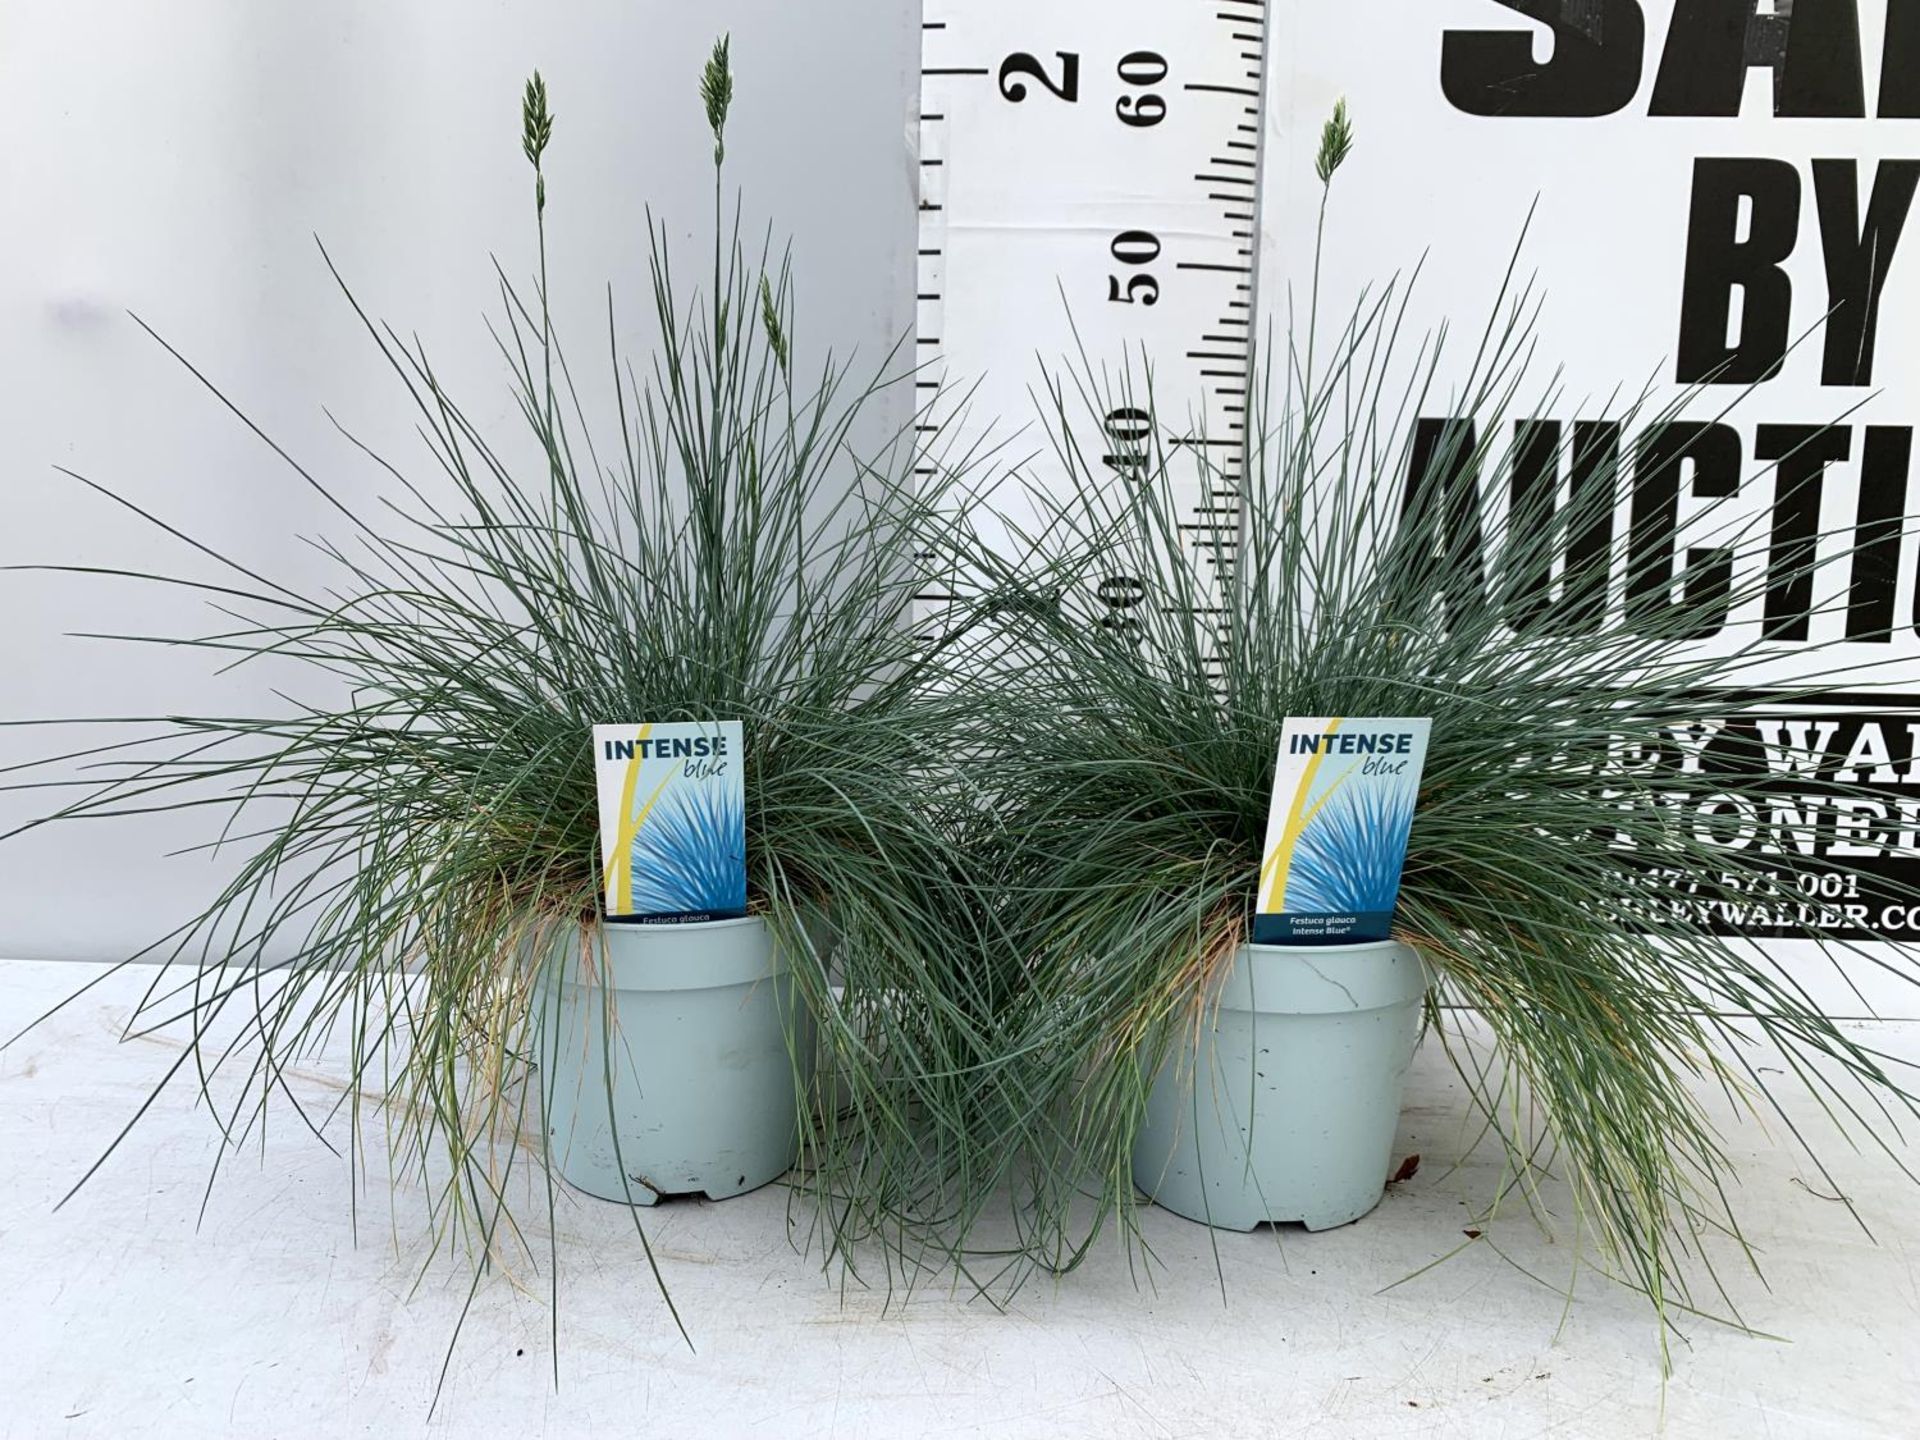 TWO FESTUCA GLAUCA 'INTENSE BLUE' ORNAMENTAL GRASSES IN 2 LTR POTS APPROX 50CM IN HEIGHT PLUS VAT TO